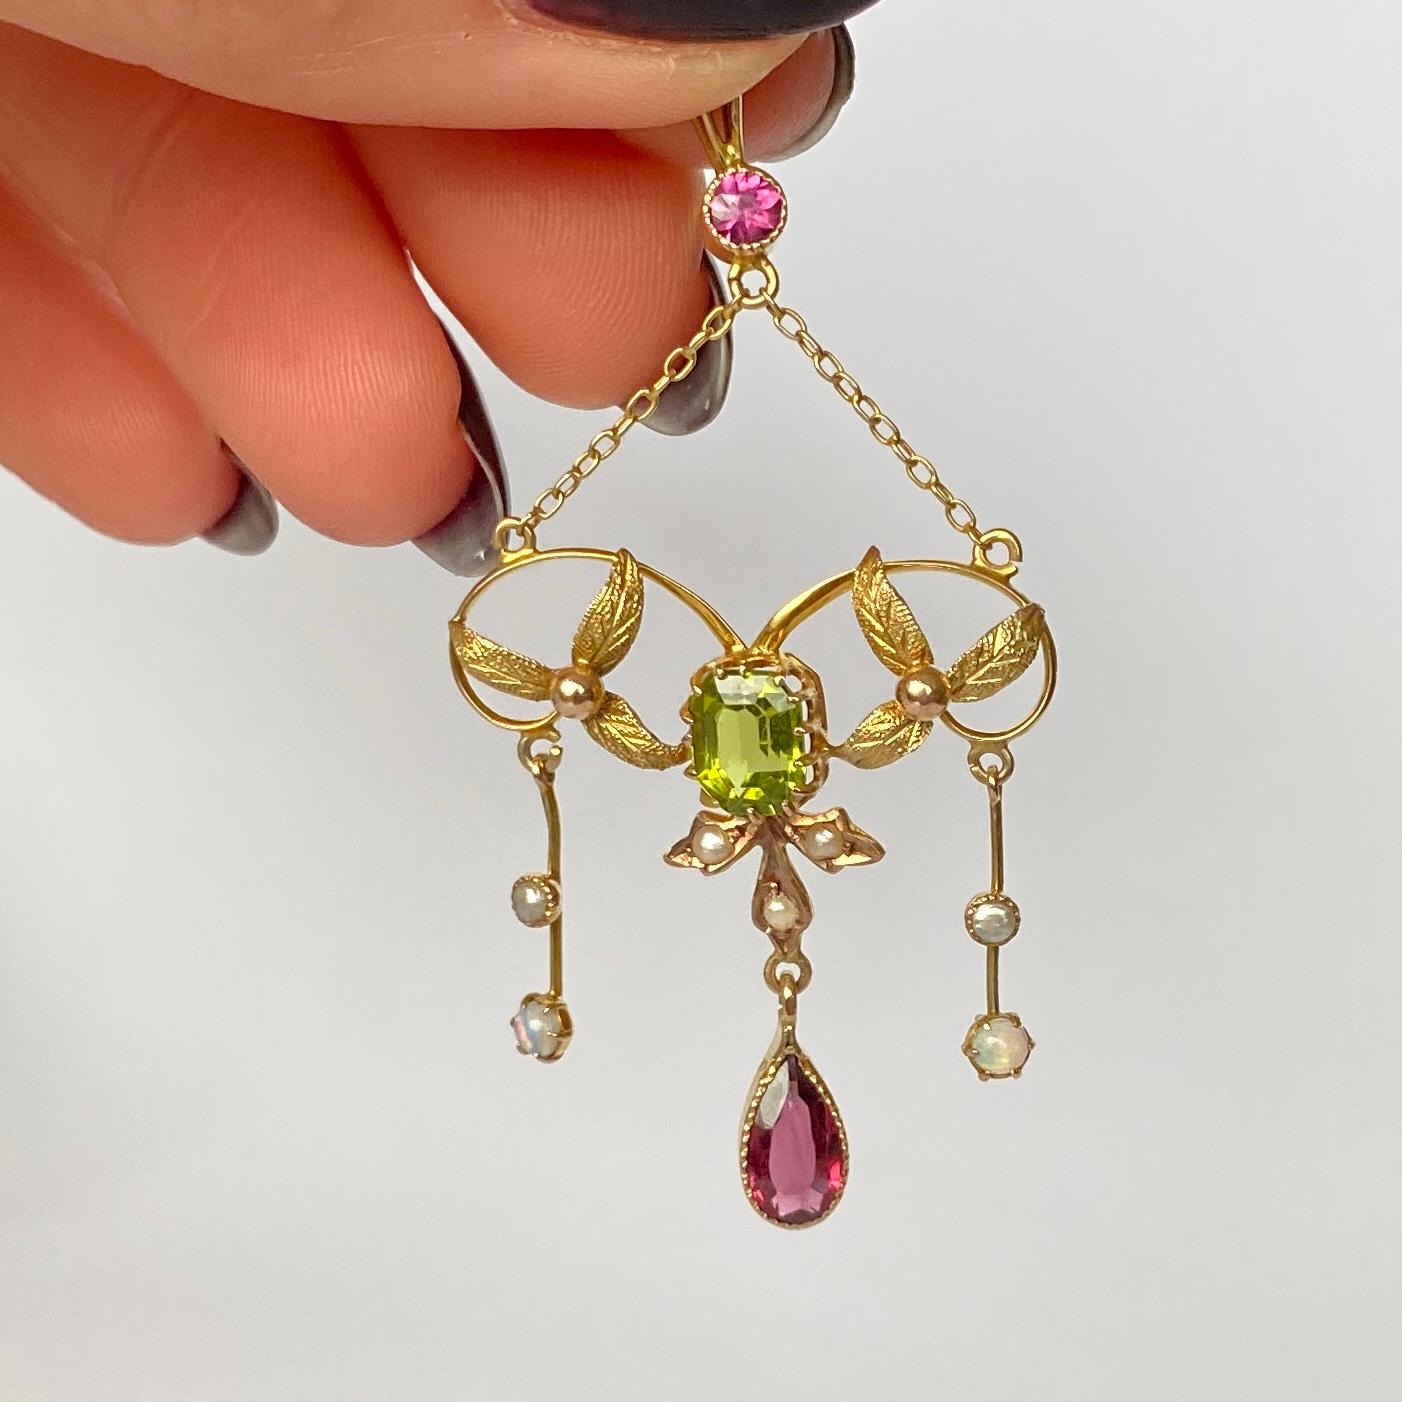 This suffragette pendant holds pink tourmaline, Peridot, Pearl and Opal and is modelled in 9carat gold. Either side of the peridot stone are trios of beautifully detailed leaves. 

Pendant top to bottom: 5.5cm

Weight: 2.7g